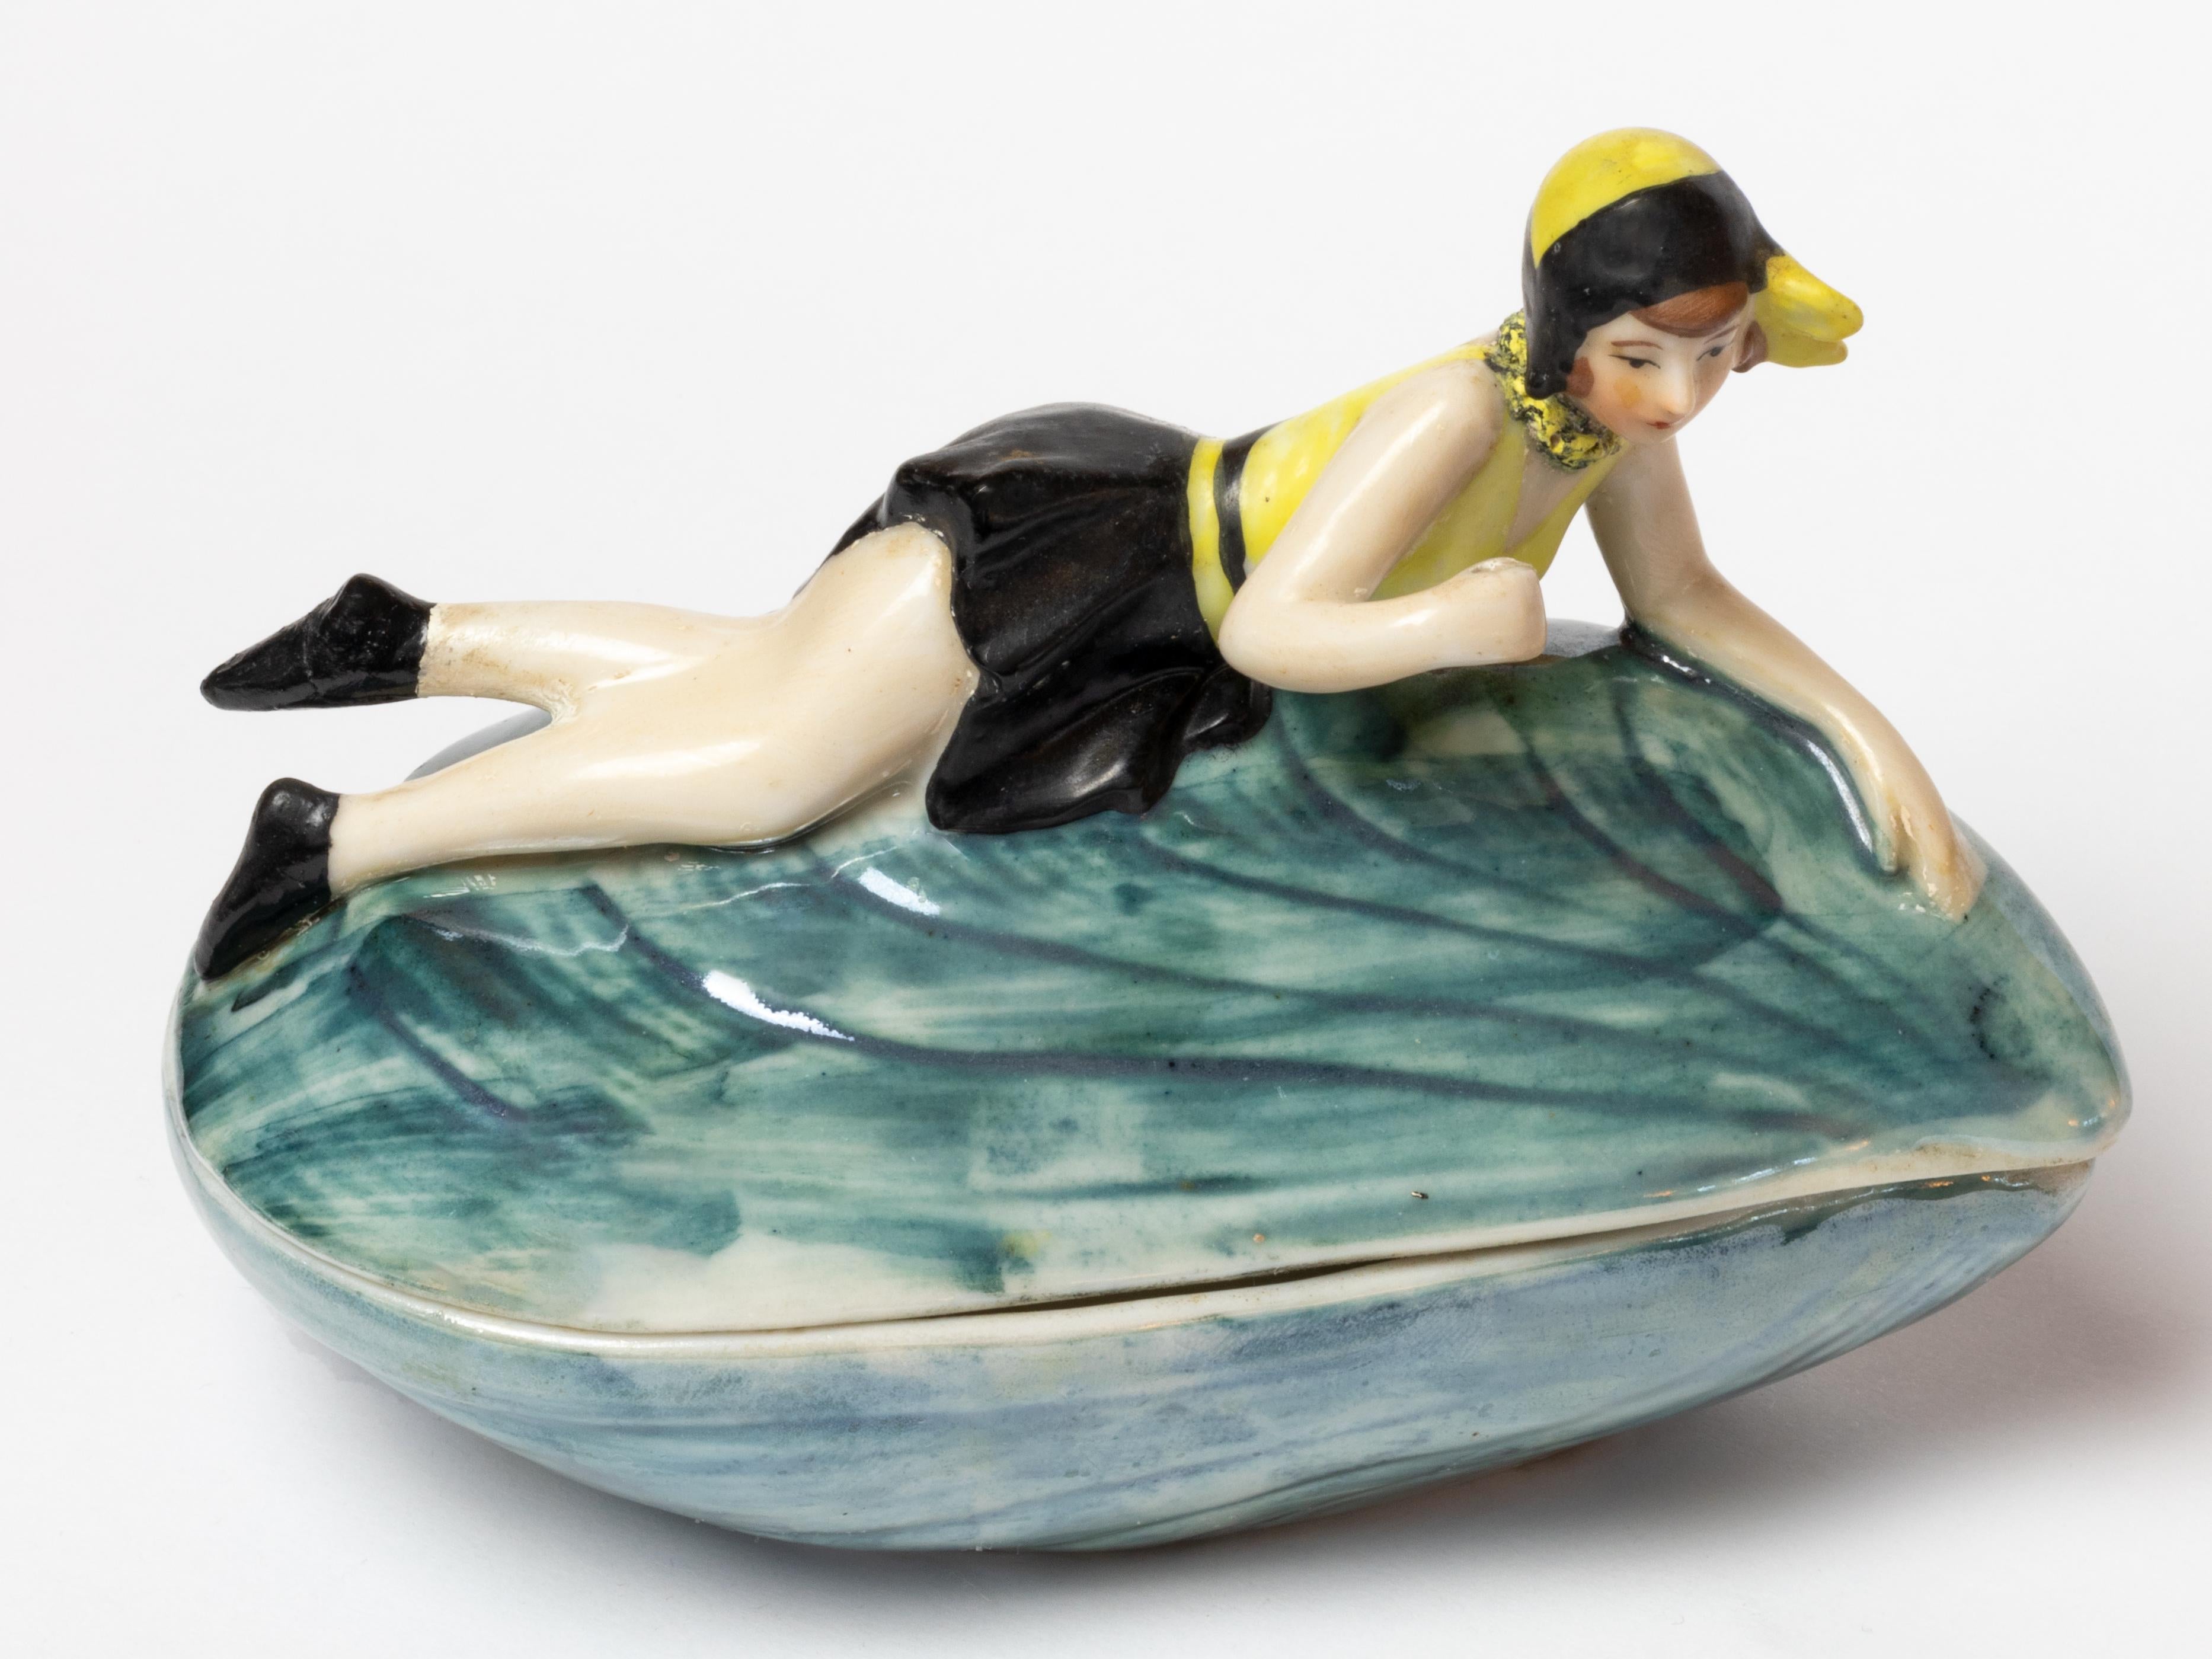 Art Deco Mussel Shell Rice Powder Box Pin Up Woman Porcelain by Goebel, 1929 For Sale 2